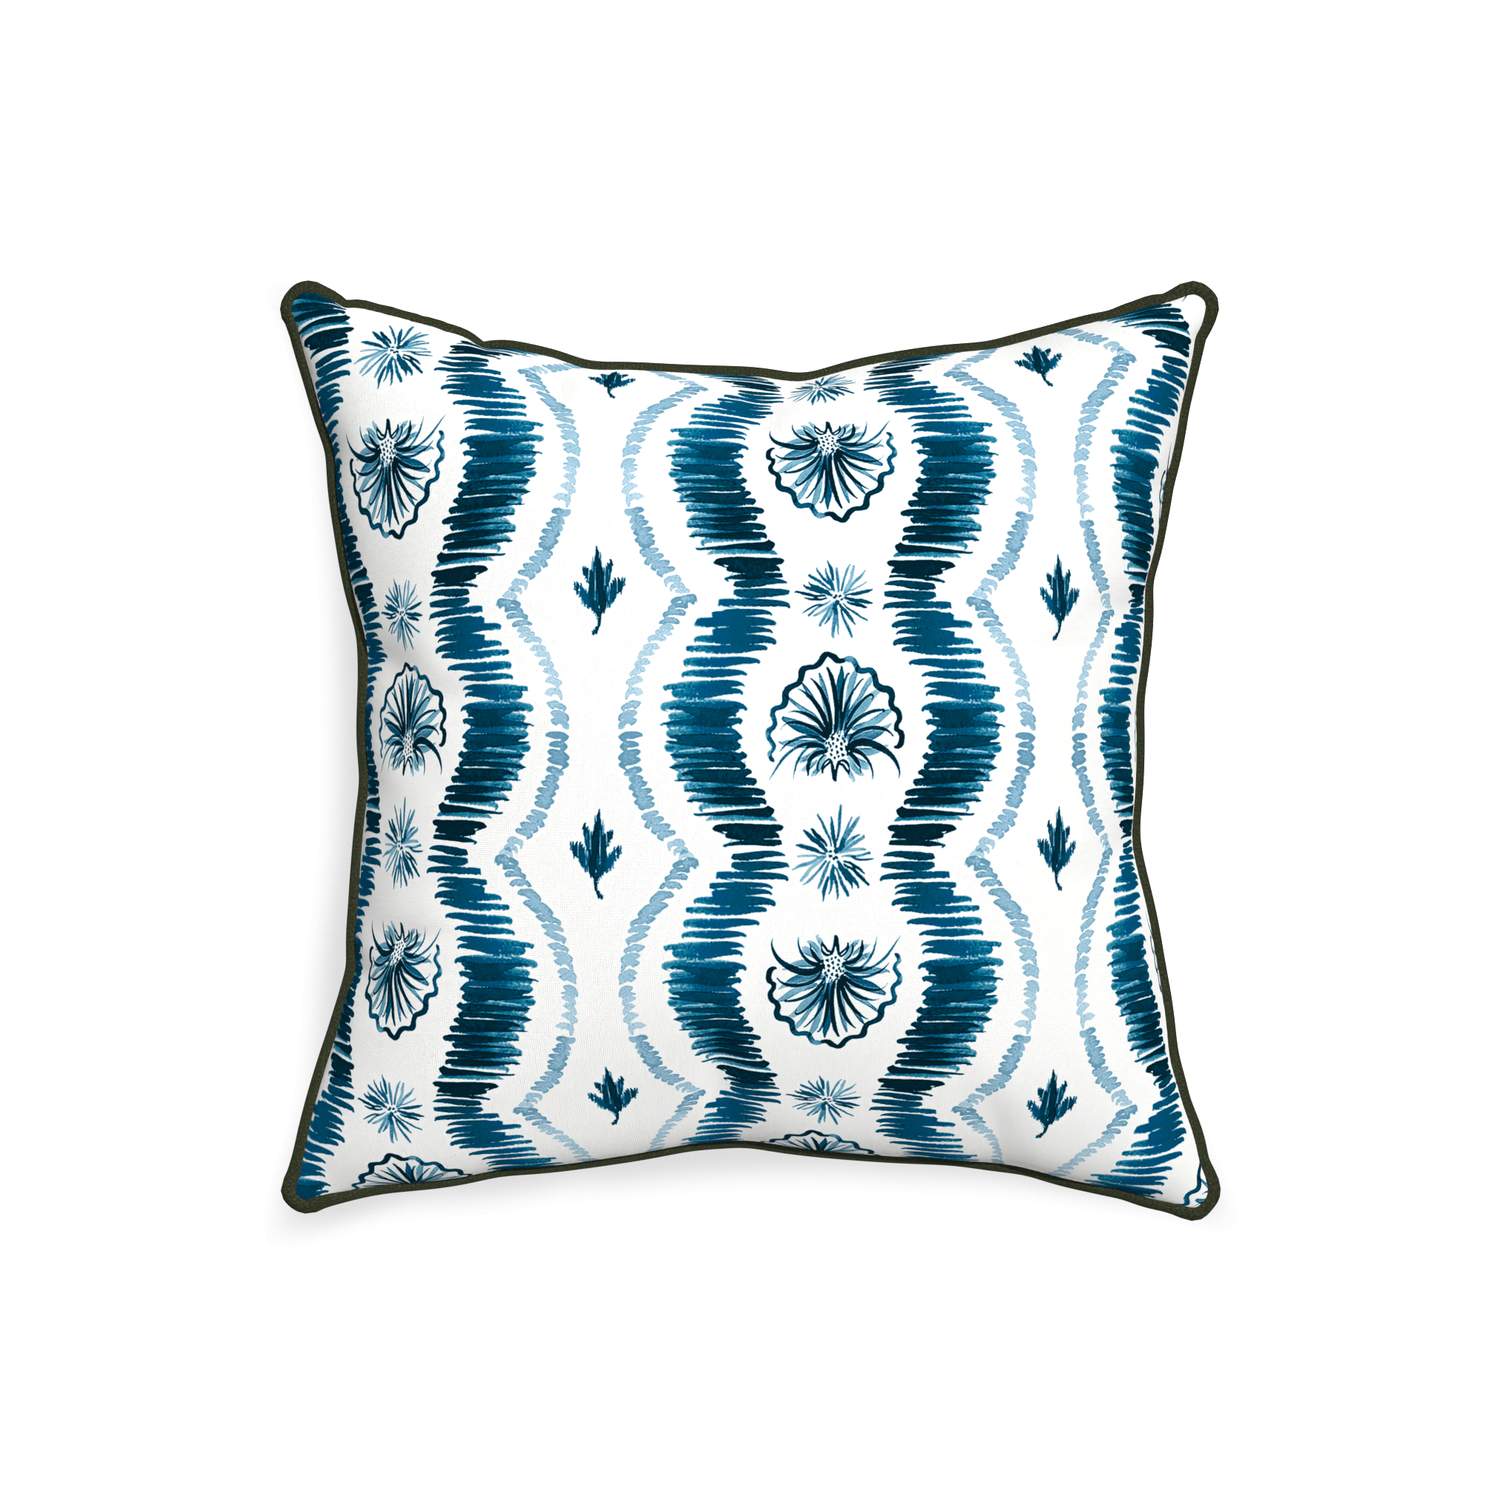 20-square alice custom blue ikatpillow with f piping on white background